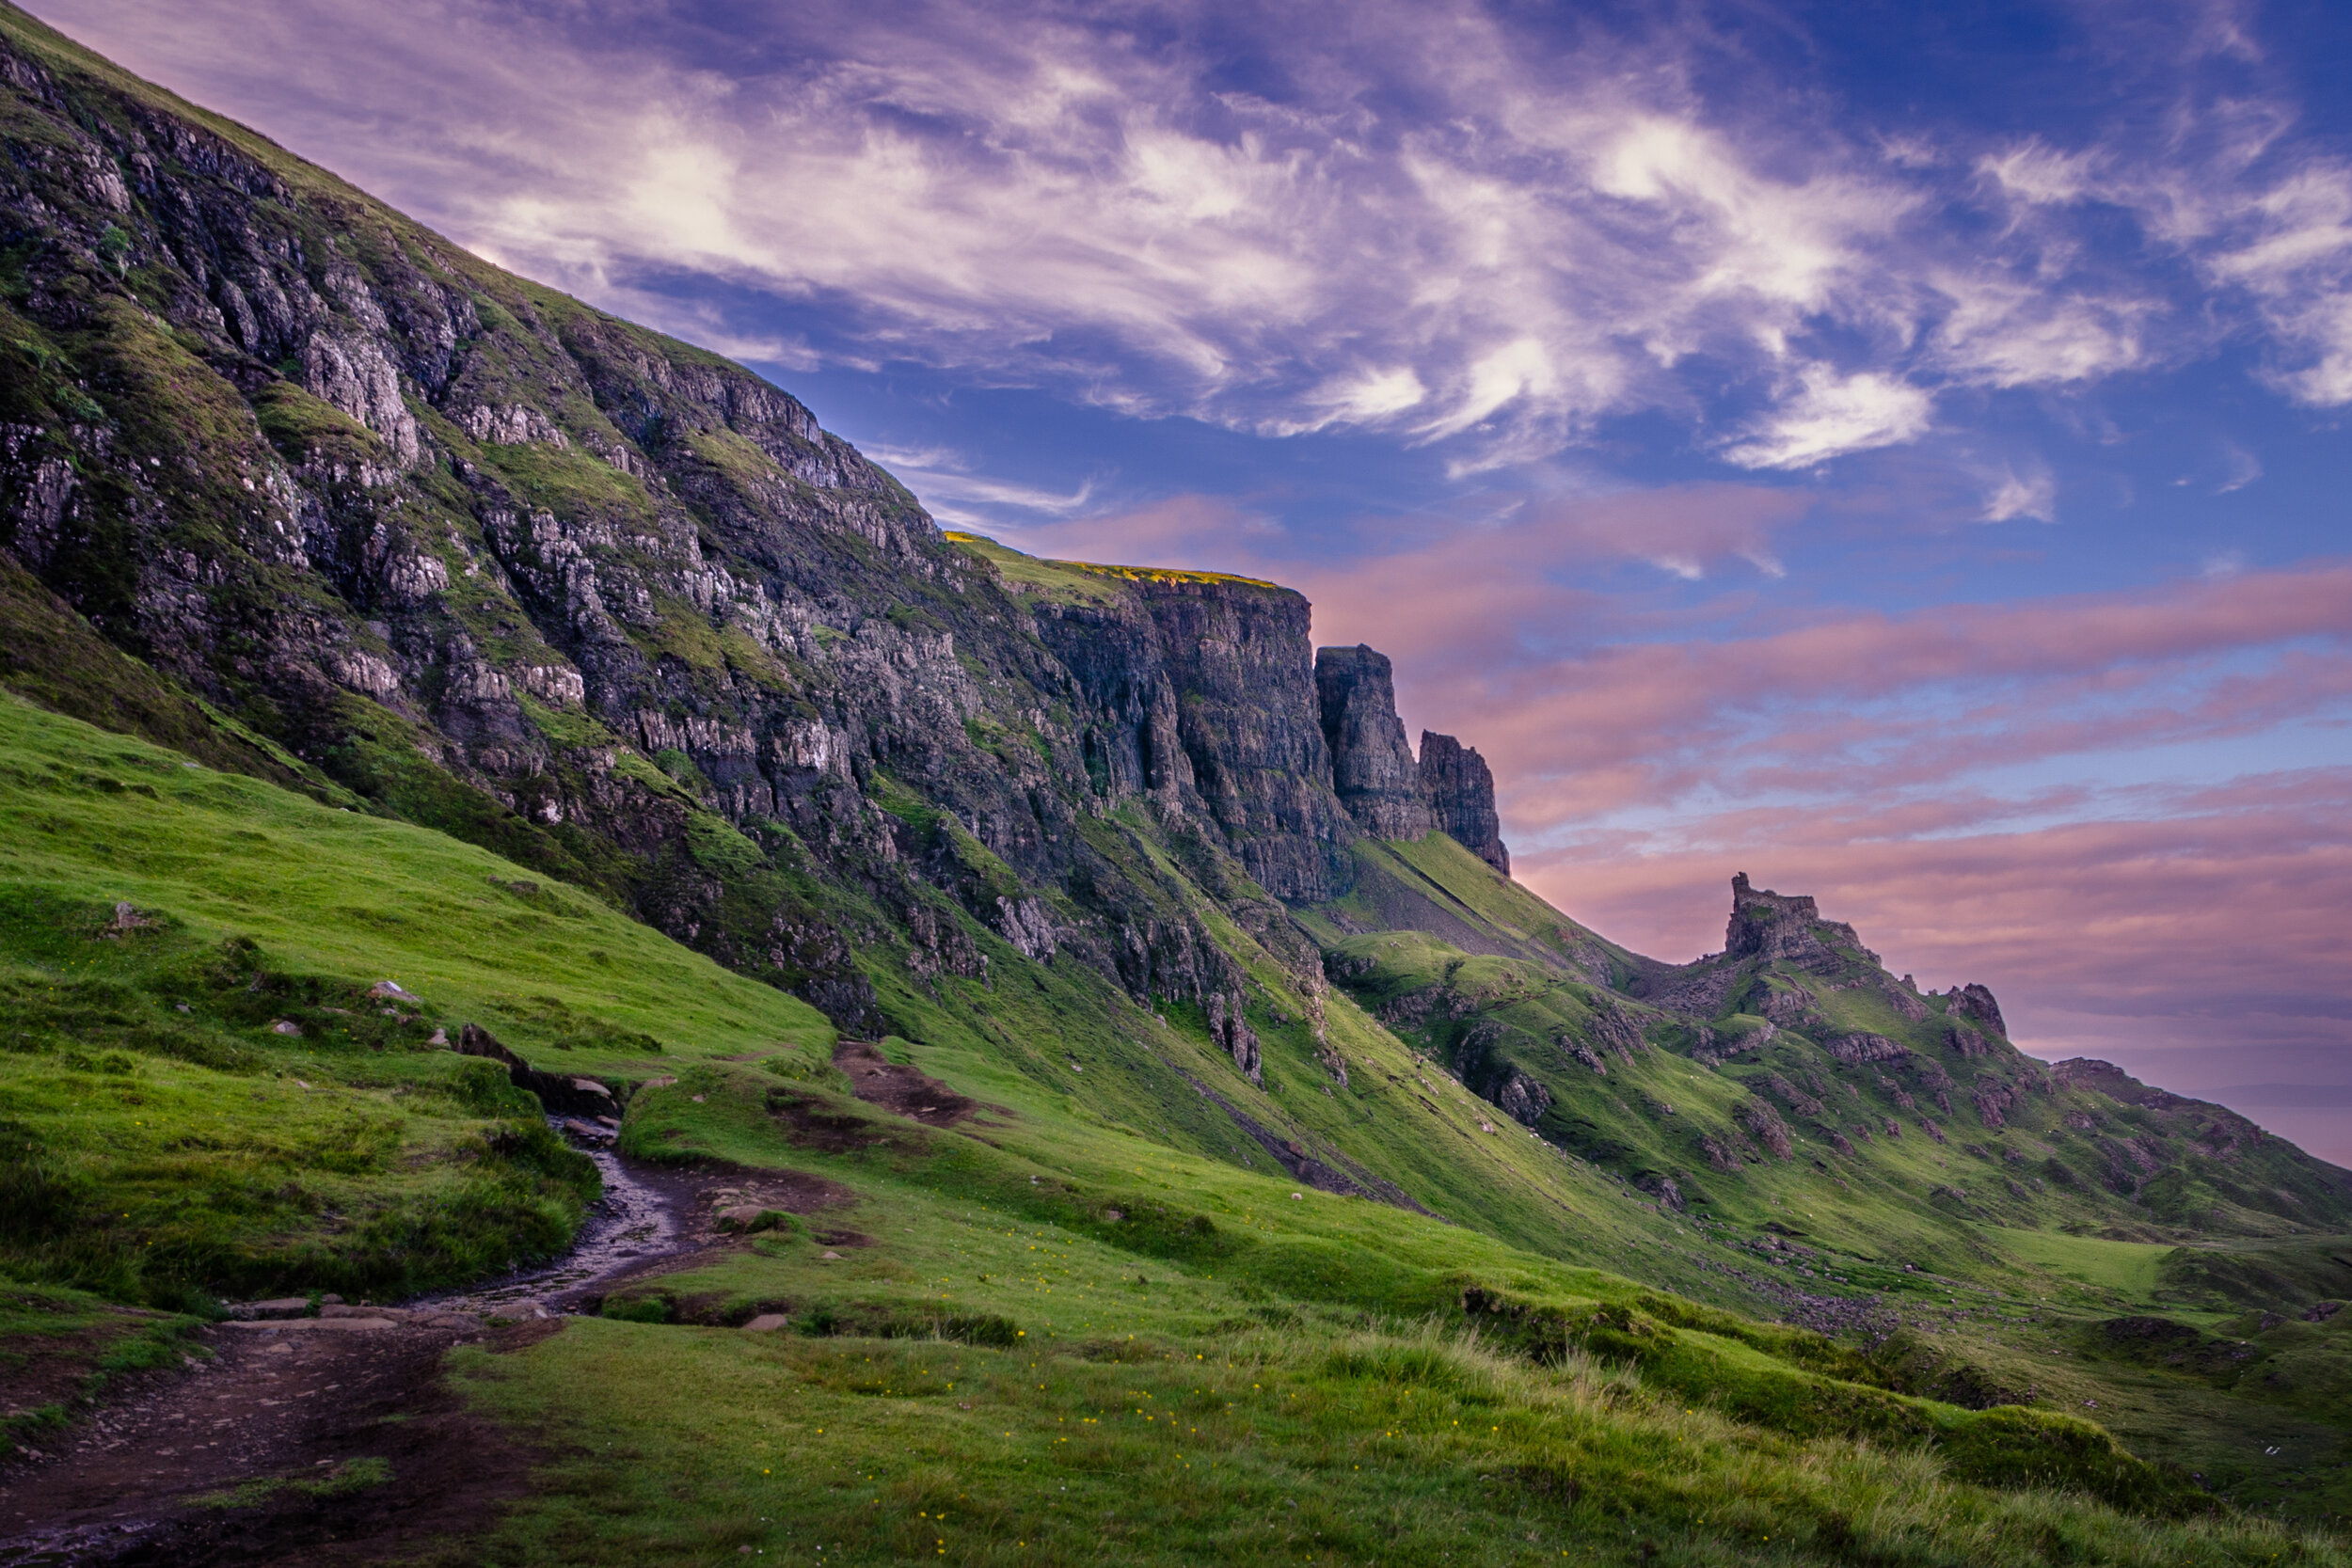 Why The Isle of Skye Should Be Your Next Otherworldly Hiking Adventure